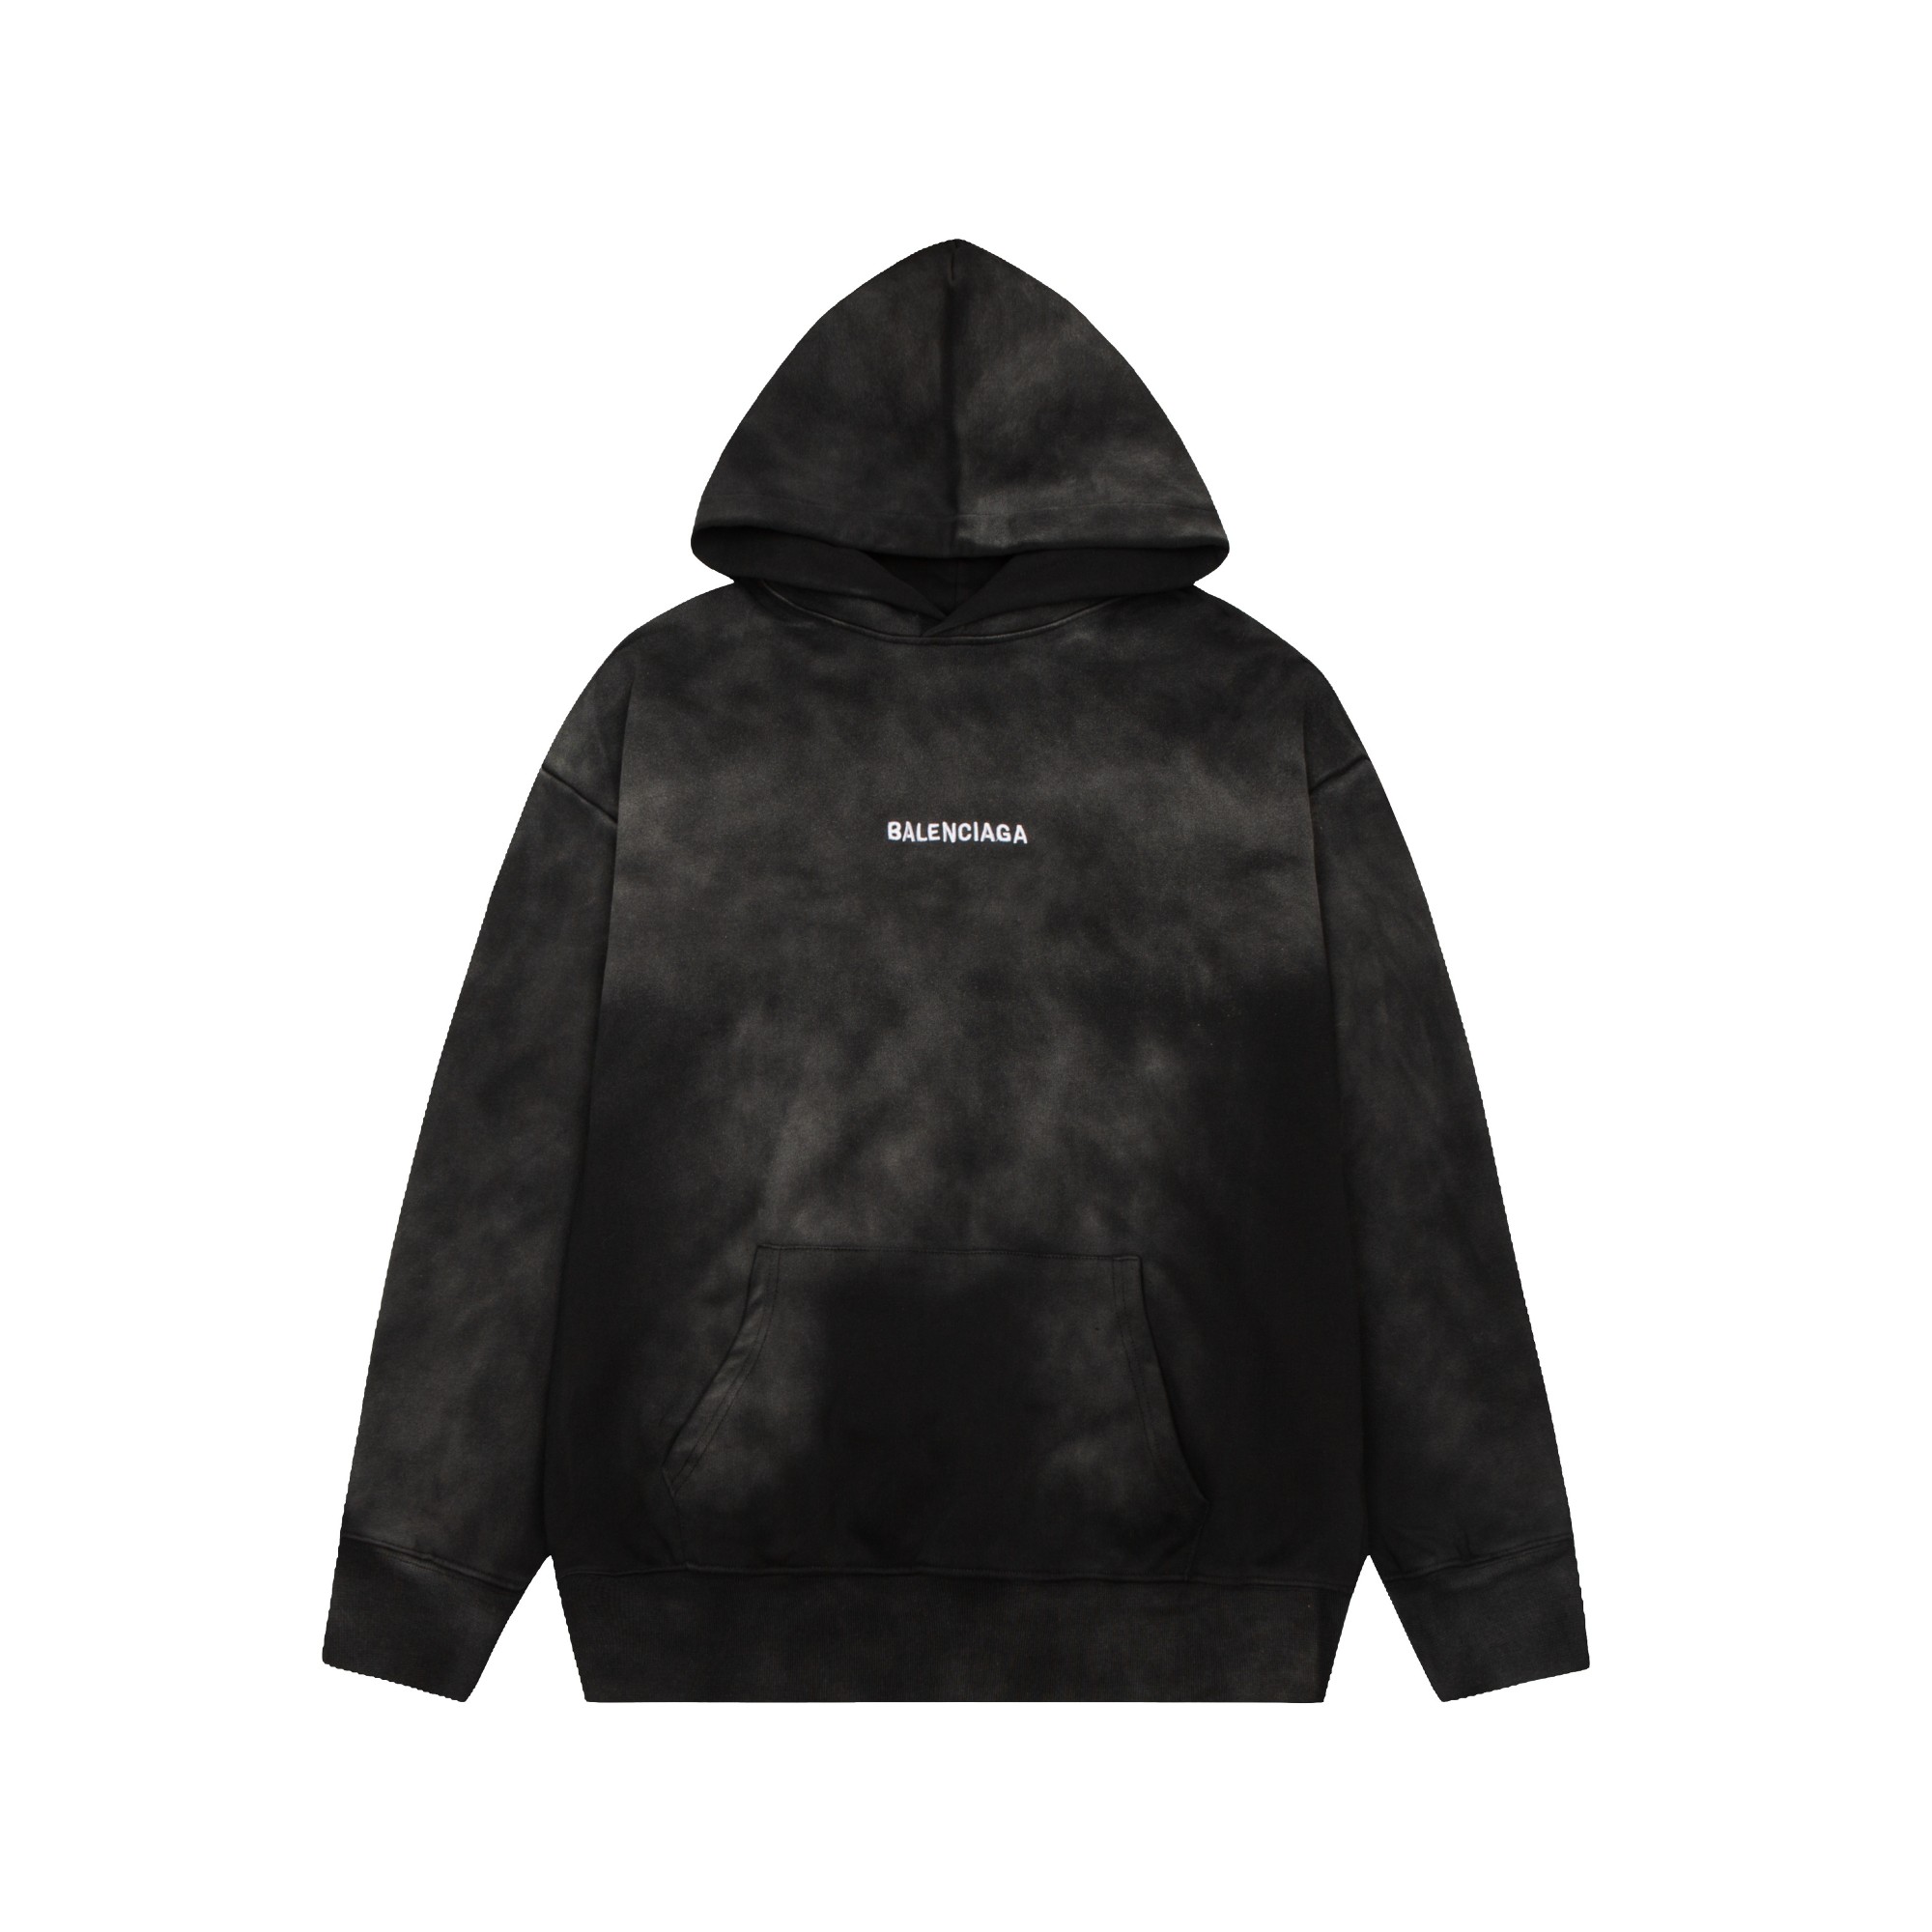 Balenciaga Clothing Hoodies Embroidery Unisex Cotton Hooded Top